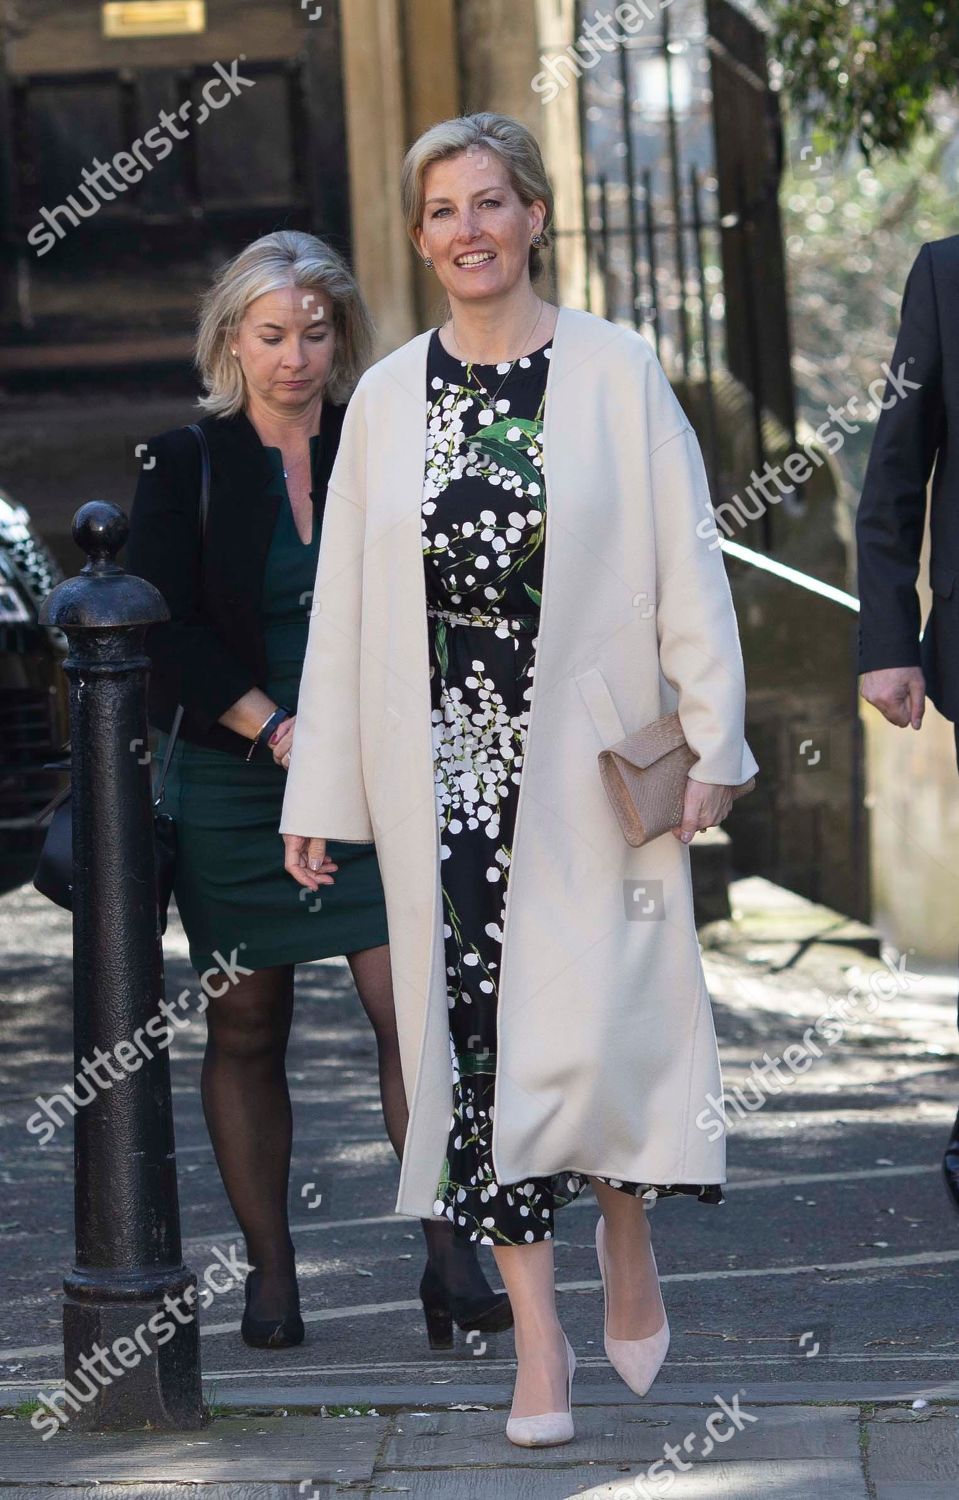 countess-of-wessex-visit-to-somerset-uk-shutterstock-editorial-10120499a.jpg